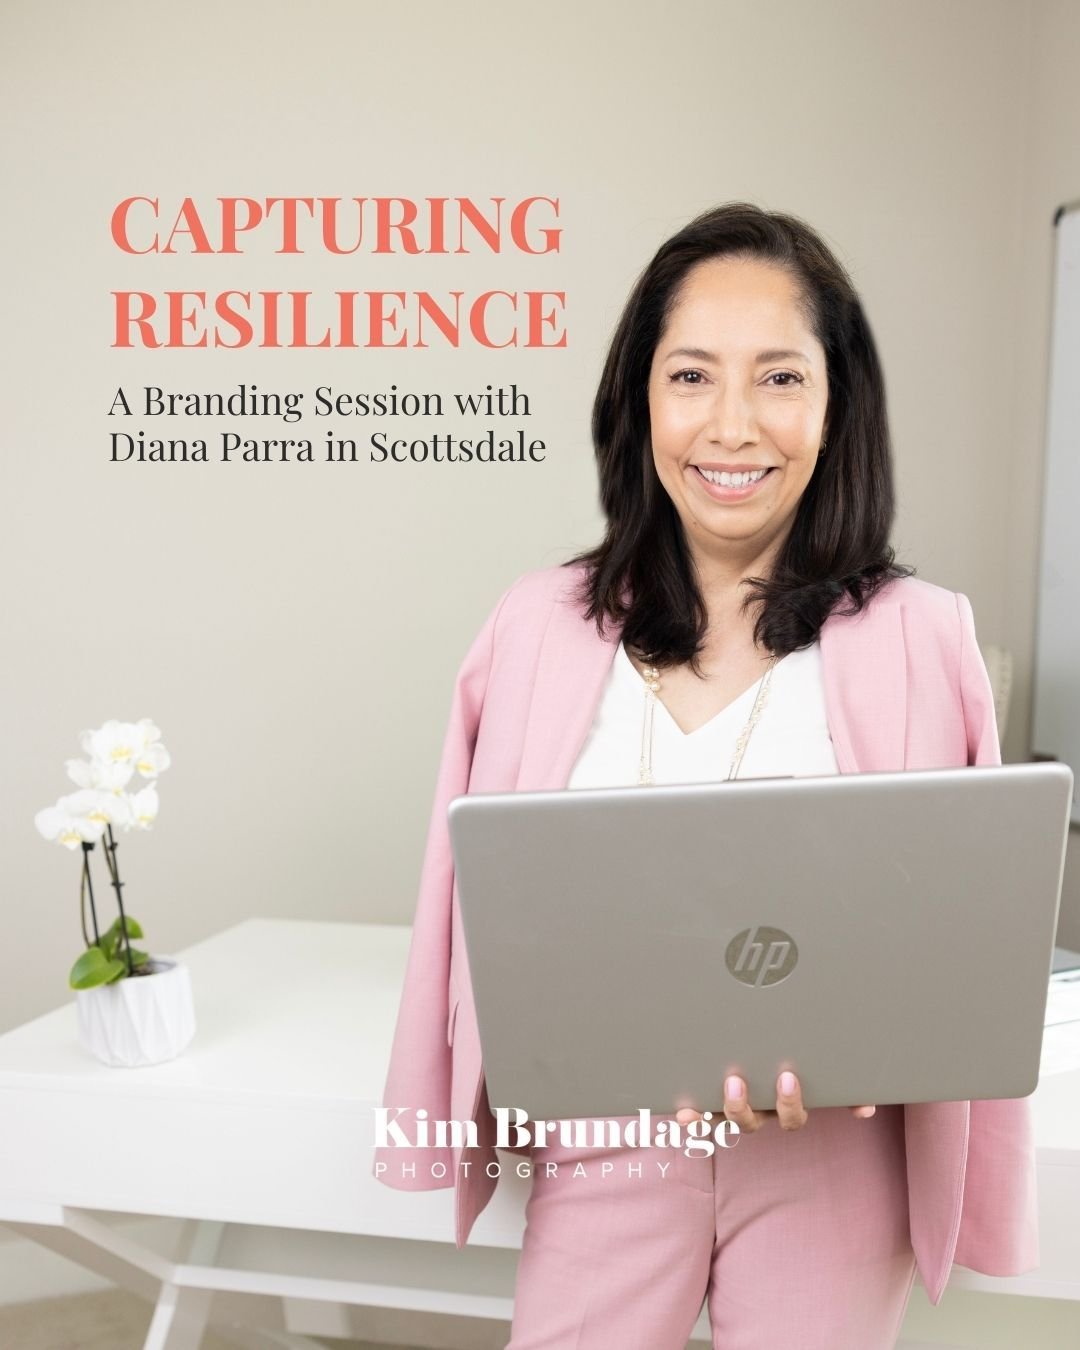 Capturing resilience and hope with Diana Parra, a remarkable transformational coach guiding women through grief and loss. 🌟

Through our branding session, we aimed to showcase her unwavering dedication to facilitating healing and empowerment. From h